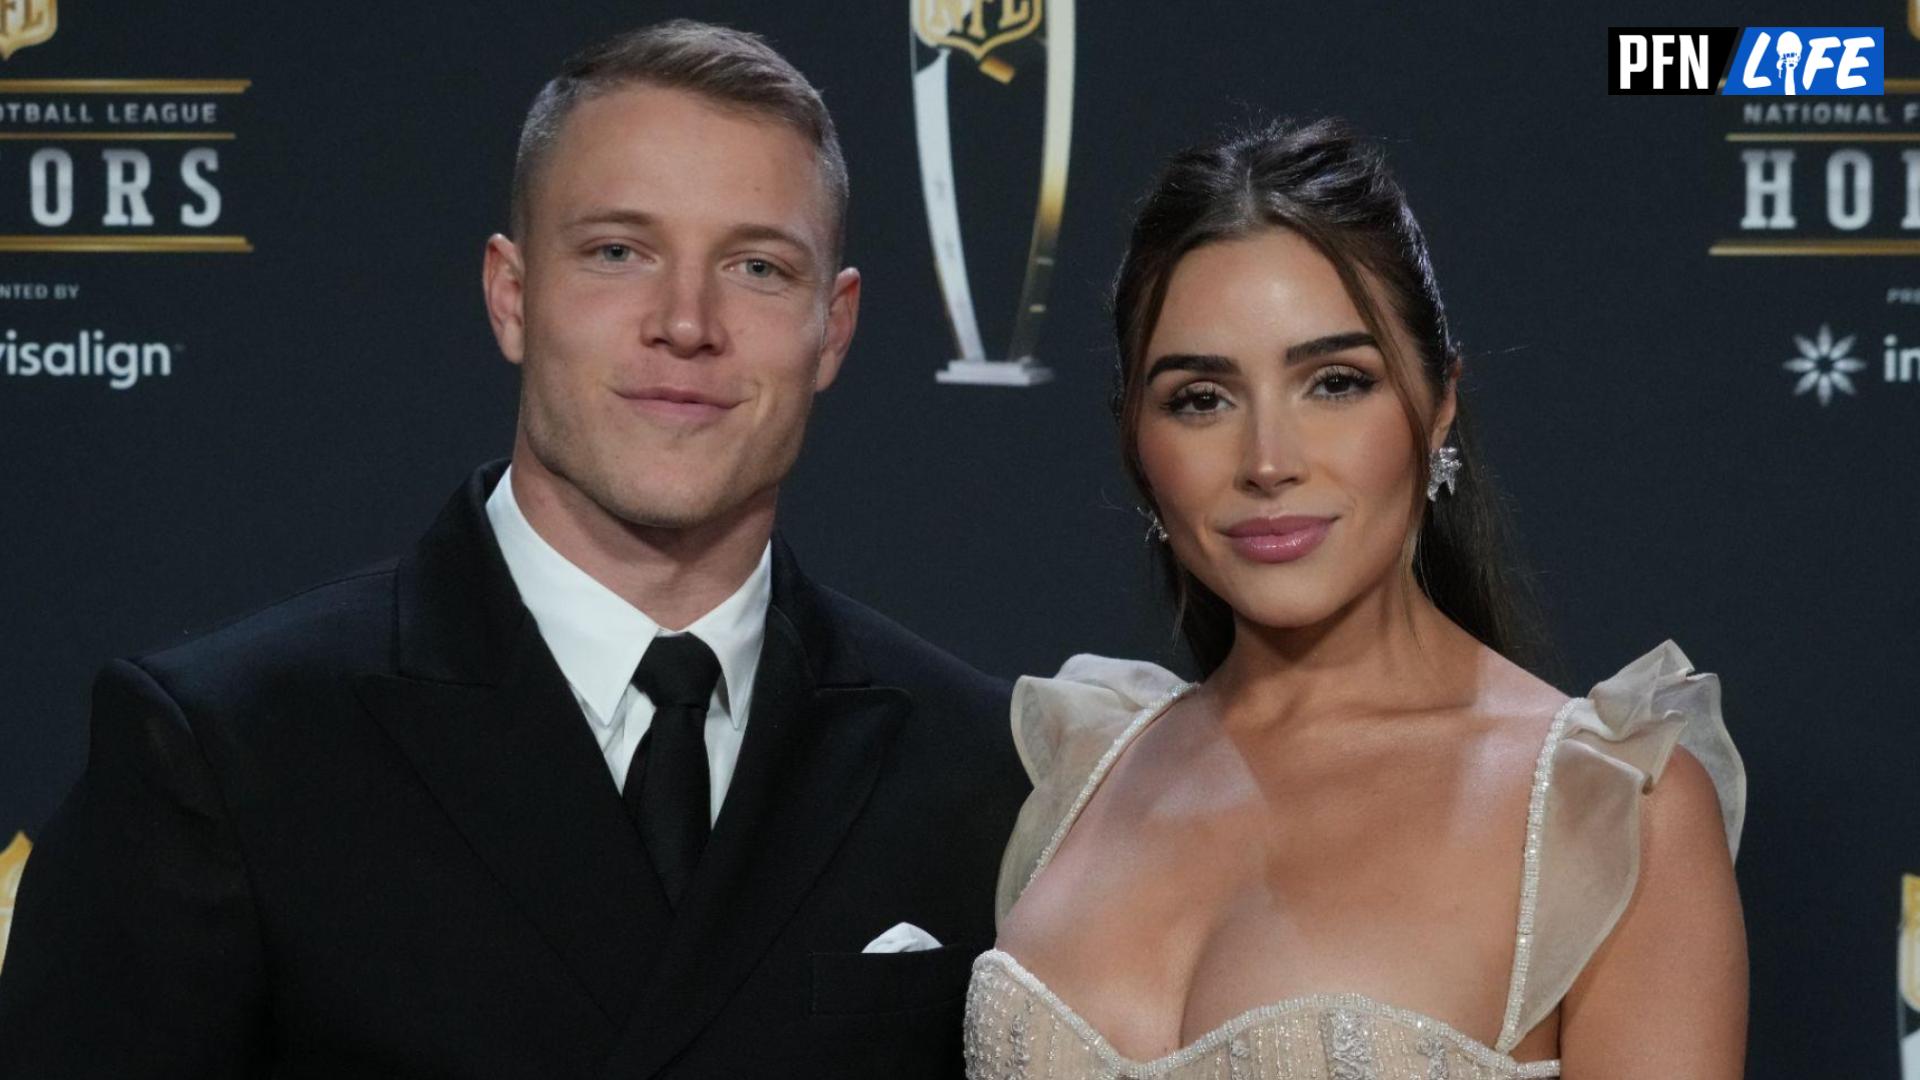 San Fancisco 49ers running back Christian McCaffrey poses for a photo on the red carpet before the NFL Honors award show at Symphony Hall.